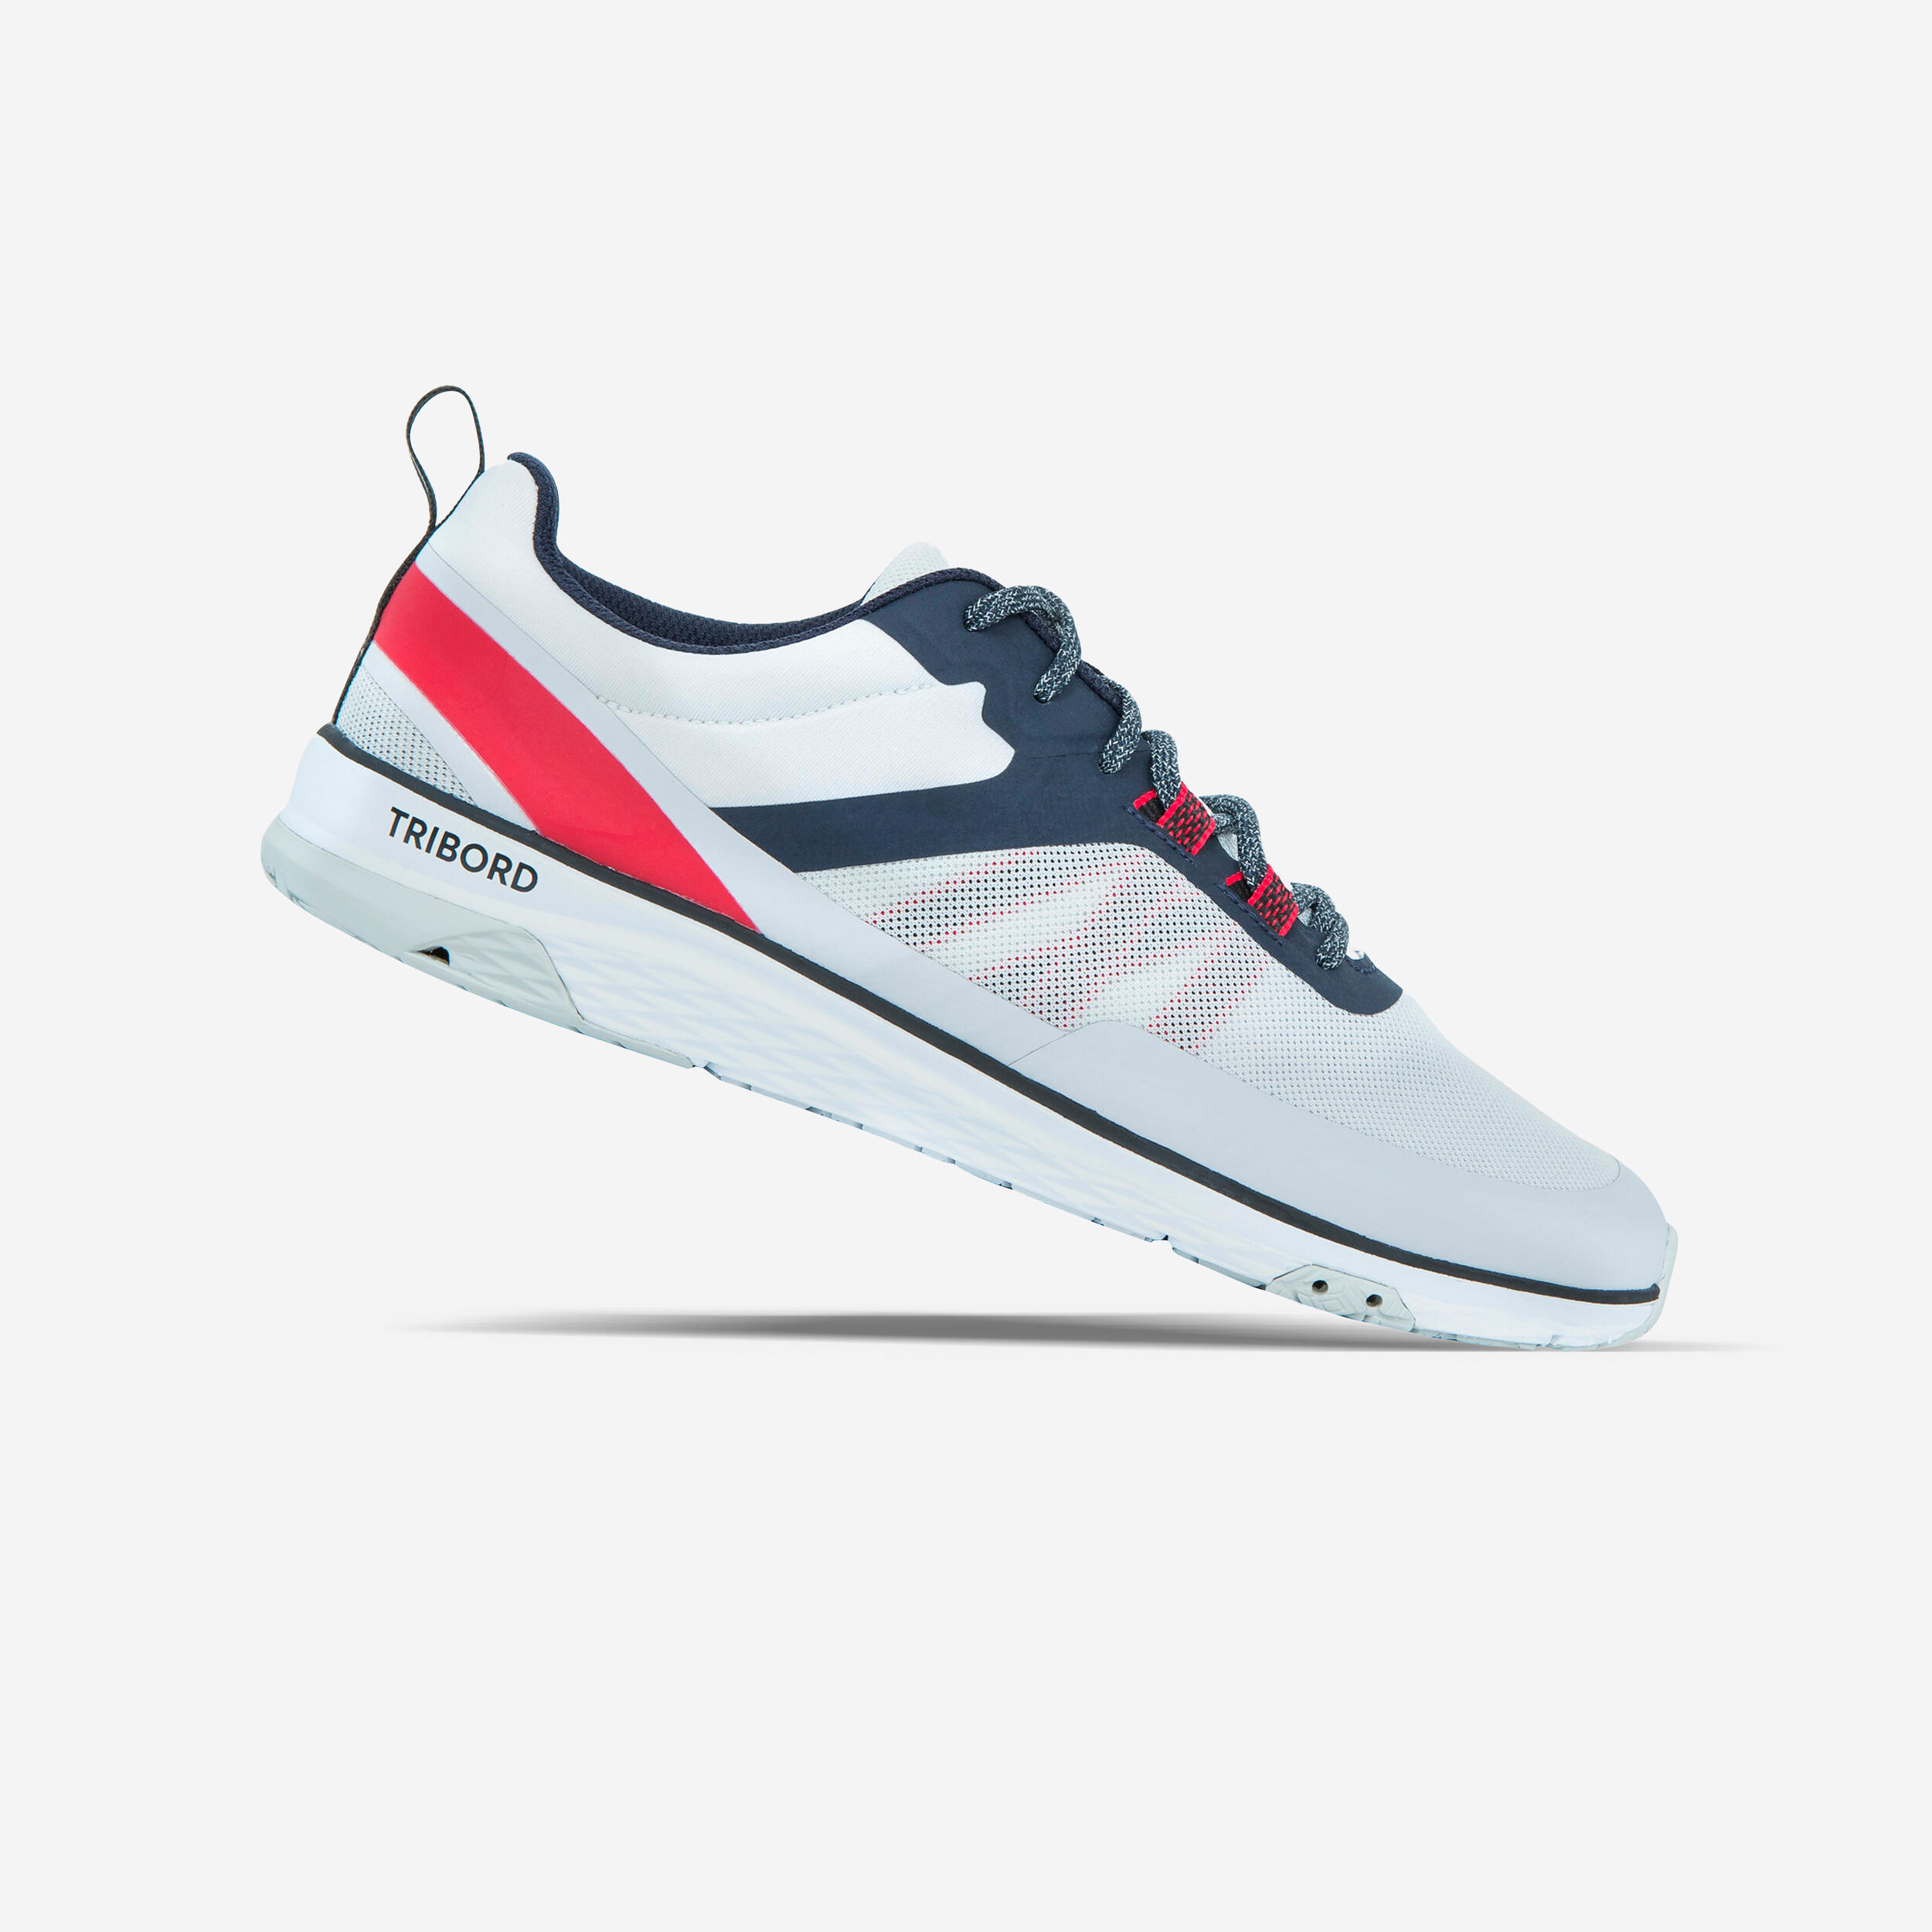 Men’s Sailing Boat Trainers Race - Light Grey / Blue / Red 1/5